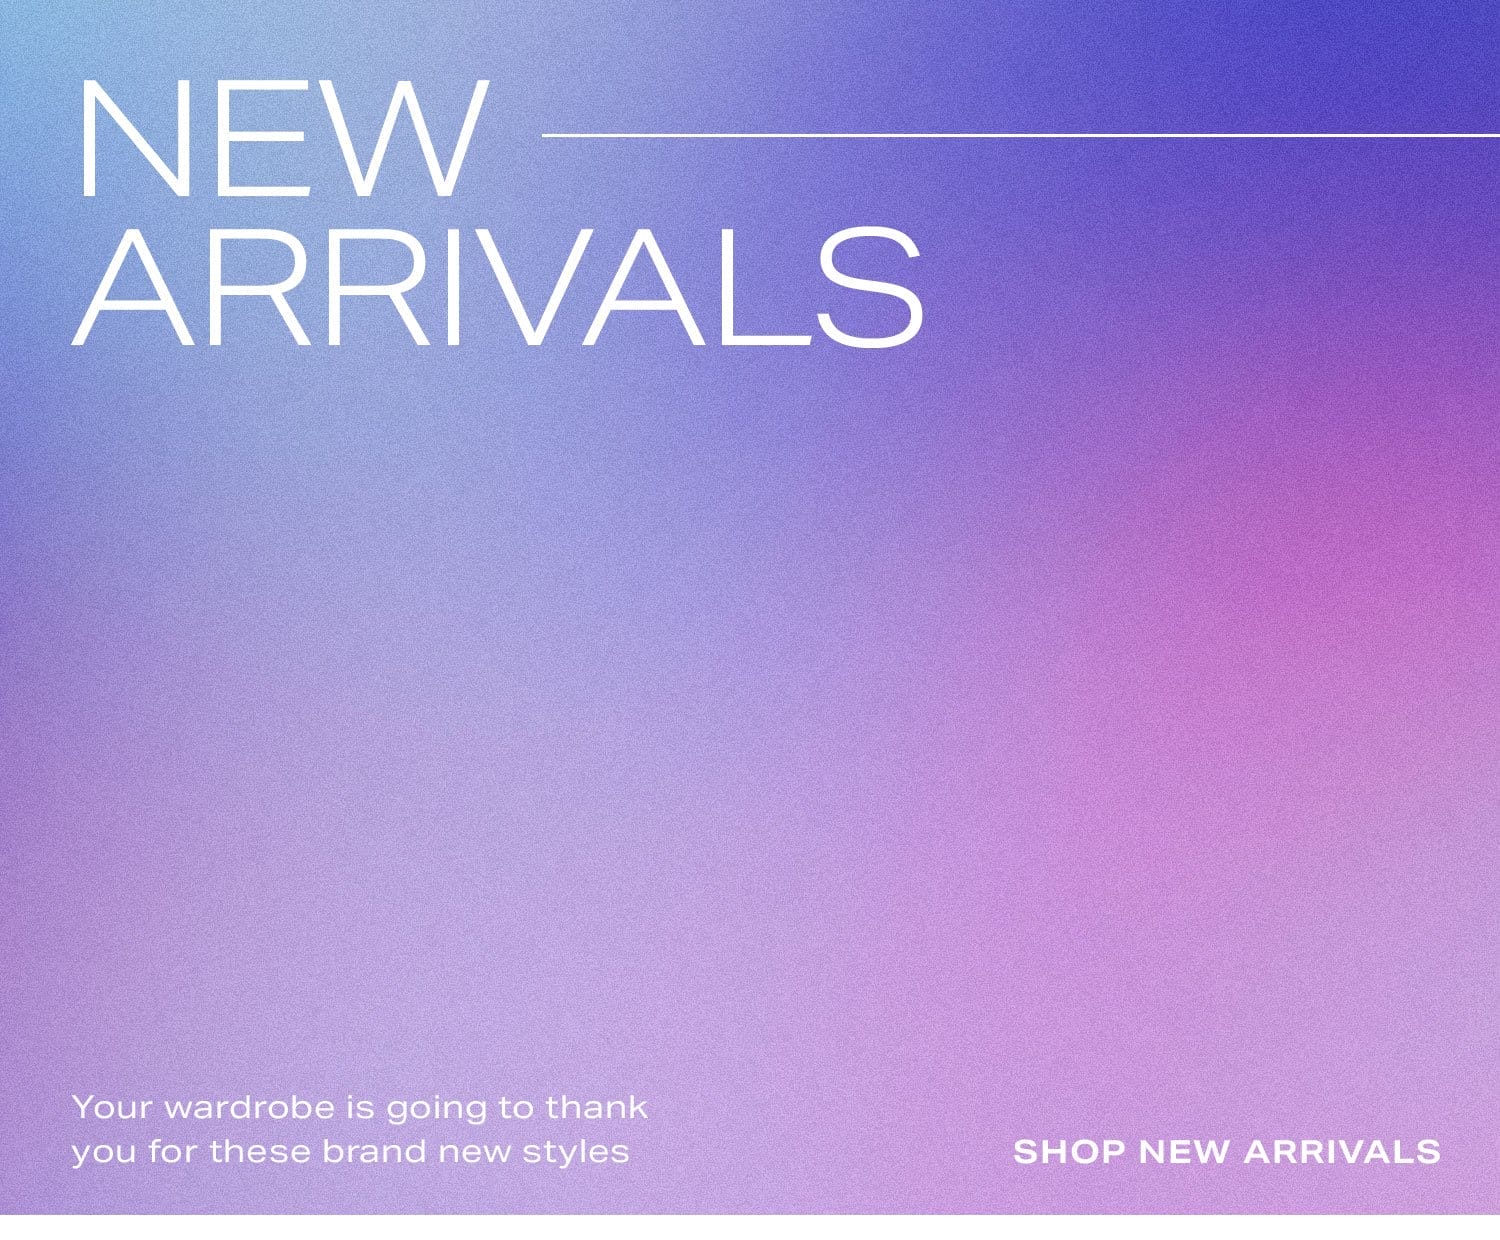 New Arrivals. Your wardrobe is going to thank you for these brand new styles. Shop New Arrivals